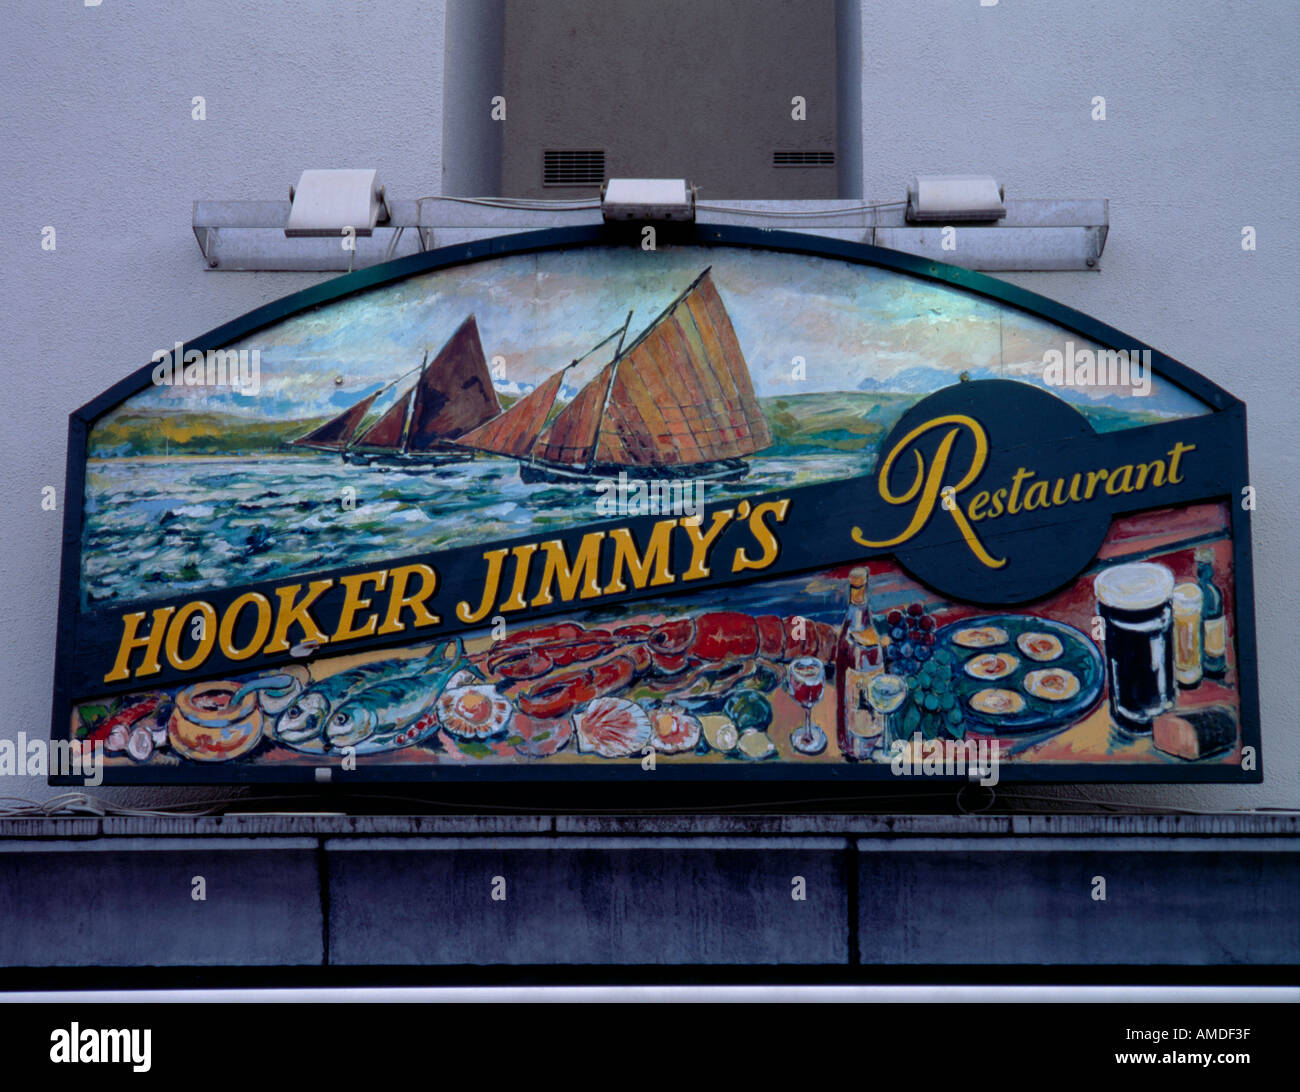 Sign outside 'Hooker Jimmy's Restaurant', Quay Street area, Galway, County Galway, Eire (Ireland). Stock Photo